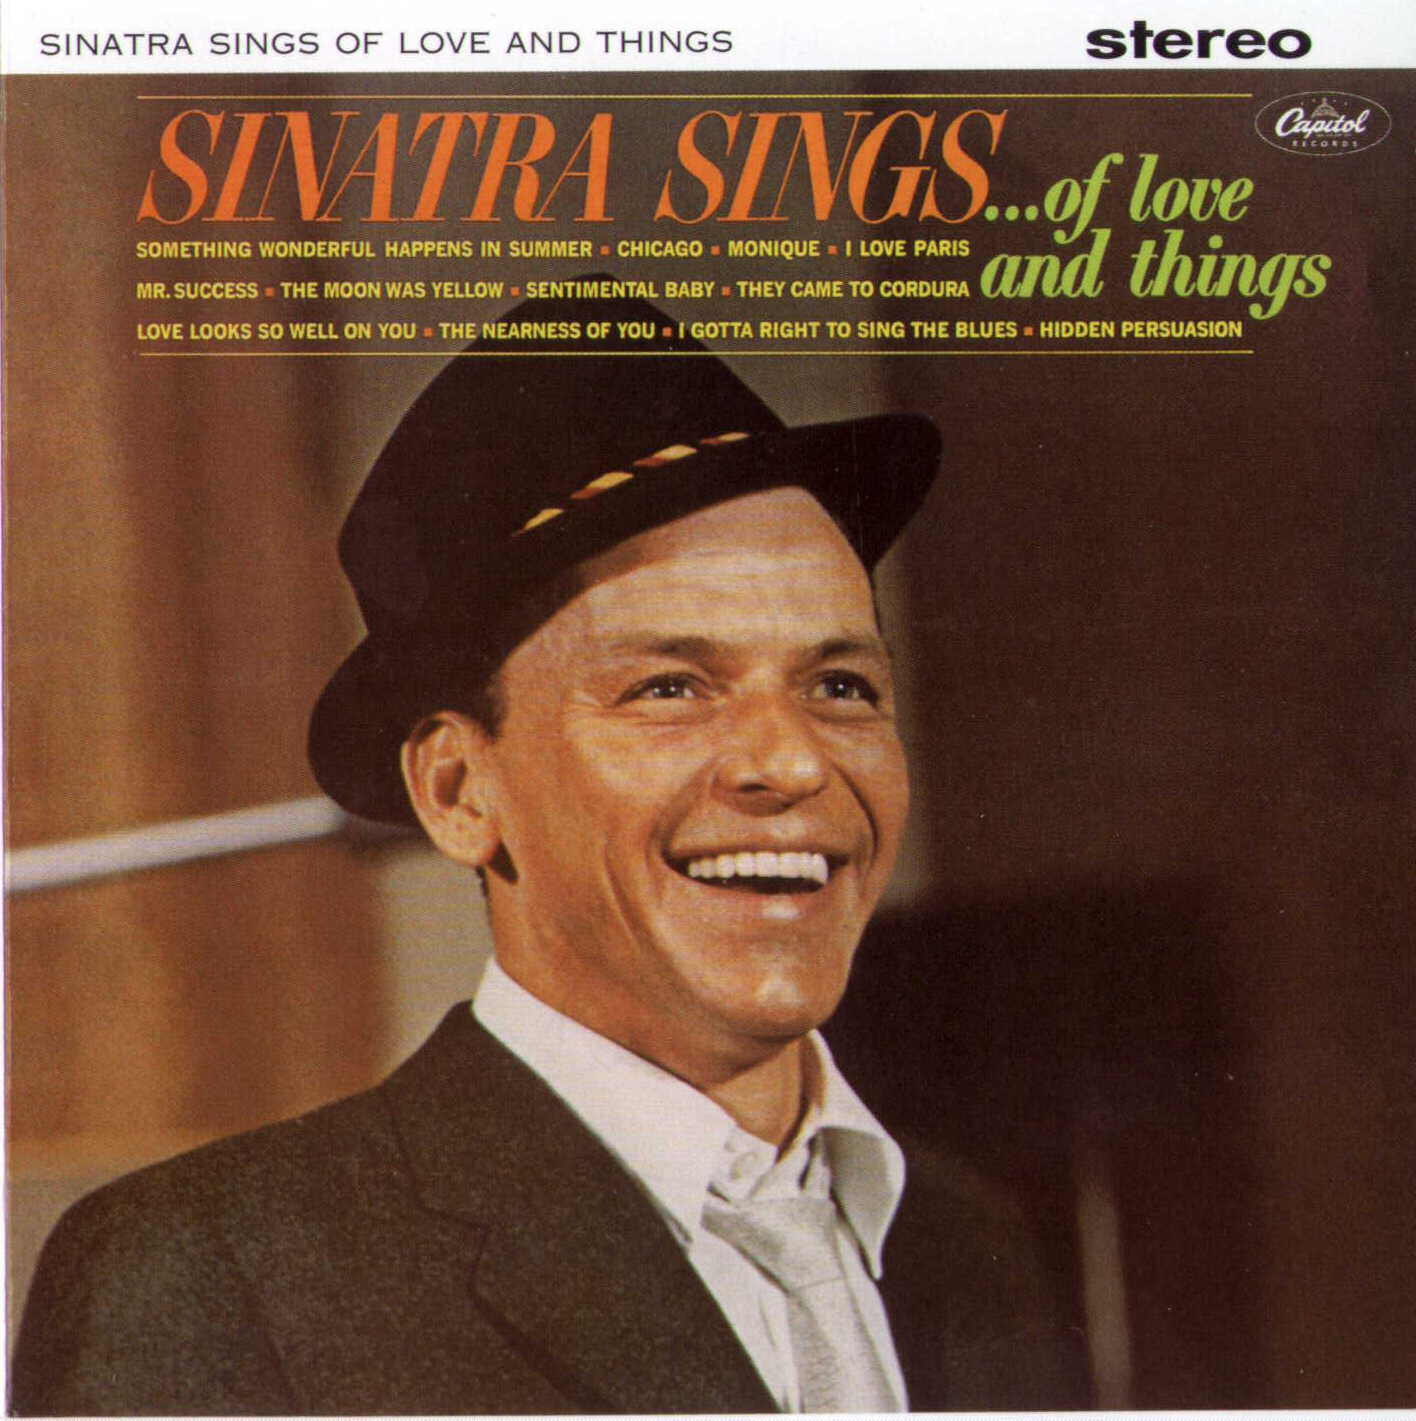 Фрэнк синатра на русском языке. Sinatra Sings… Of Love and things Фрэнк Синатра. Frank Sinatra album Cover. Copacabana Фрэнк Синатра. Sinatra - Sinatra 1988 обложка.